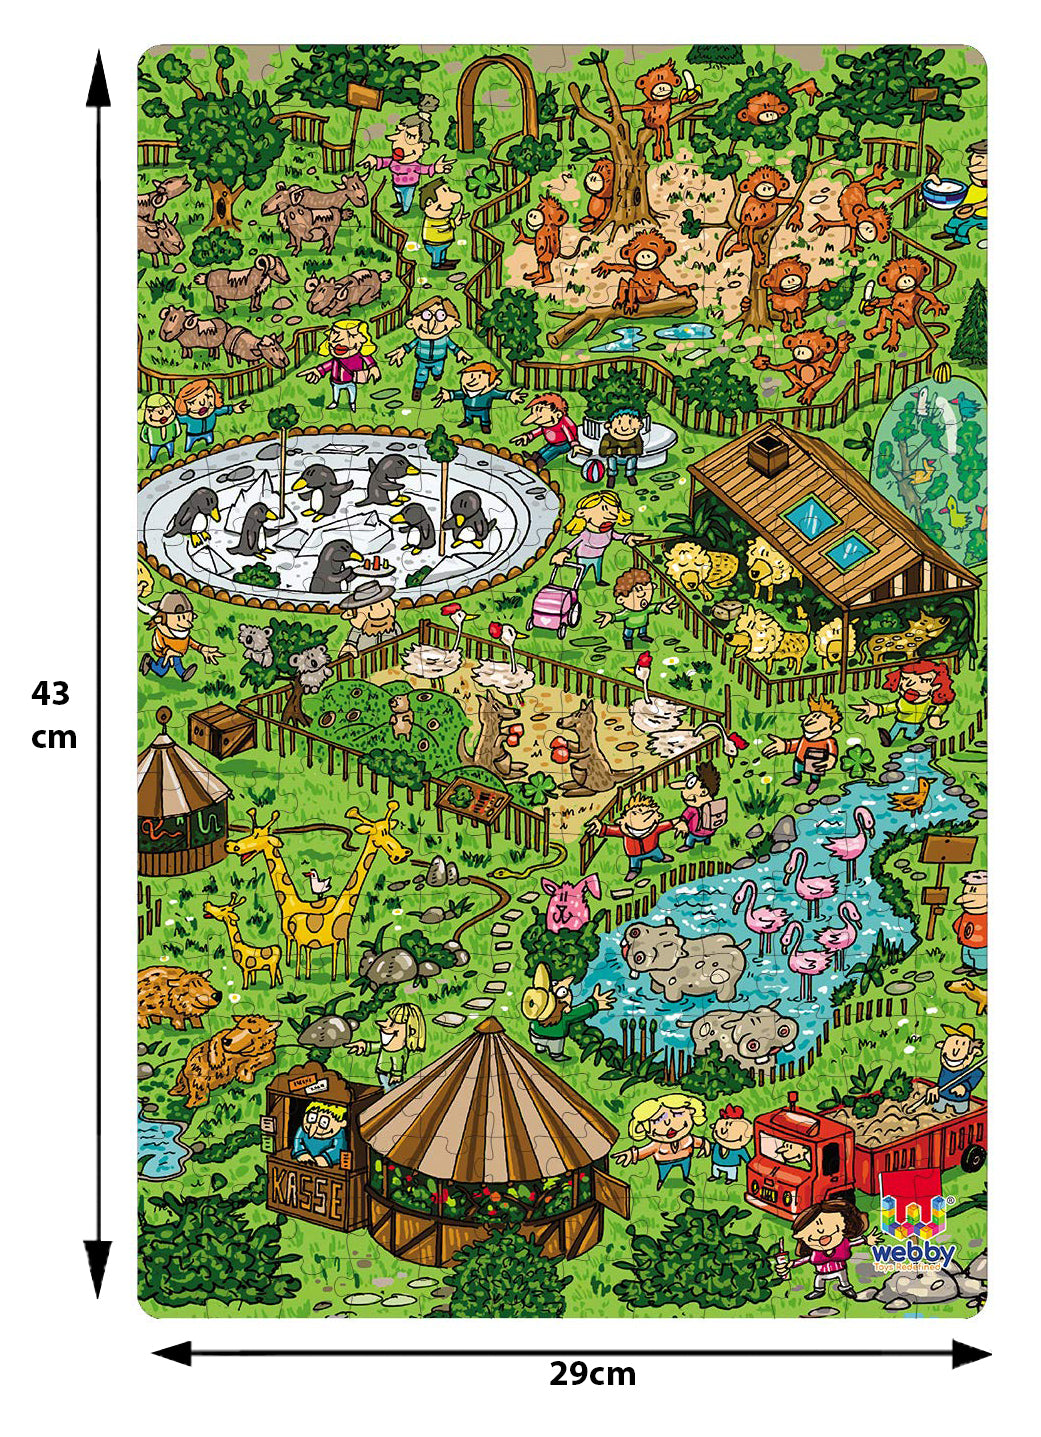 Webby City Zoo Illustration Jigsaw Puzzle, 252 pieces